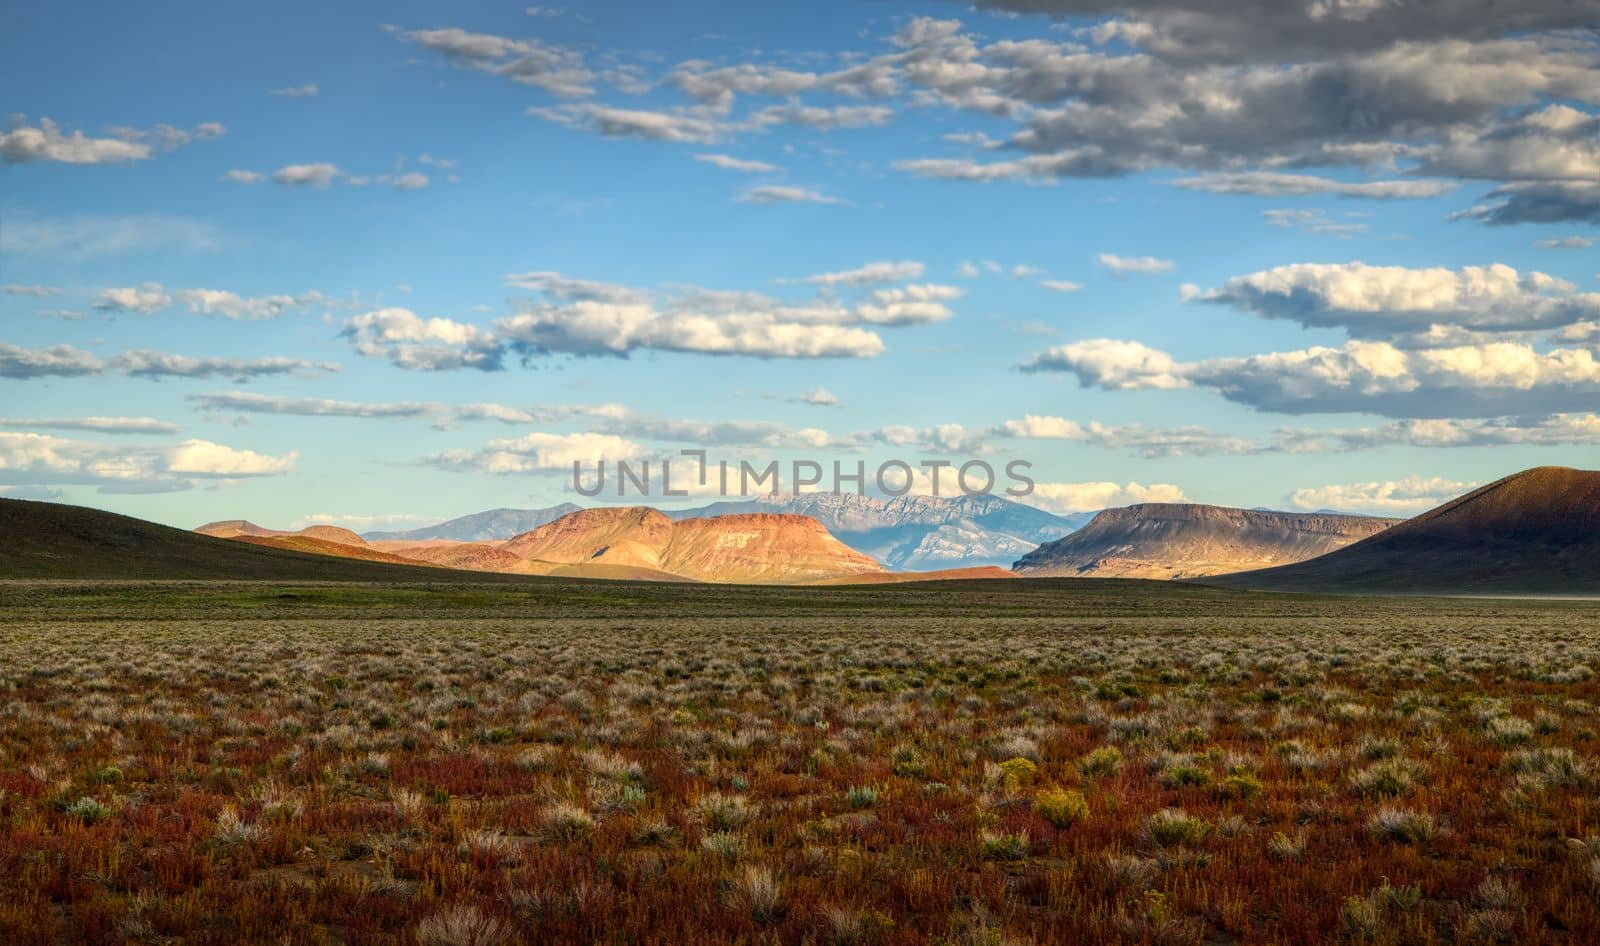 Remote Lunar Crater Area Nevada by lisaldw